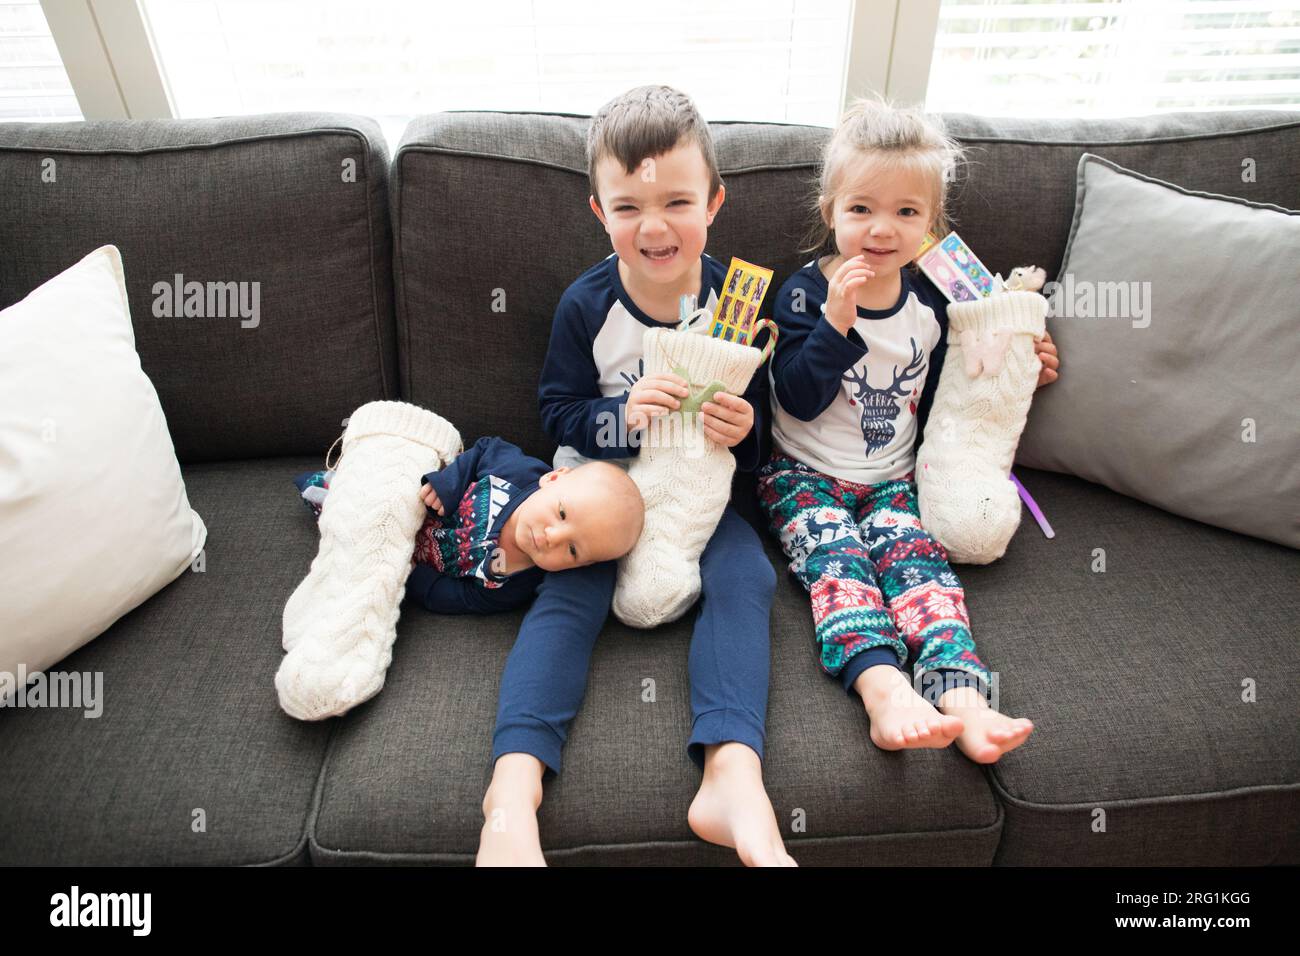 Three kids sit on couch holding their Christmas stockings Stock Photo